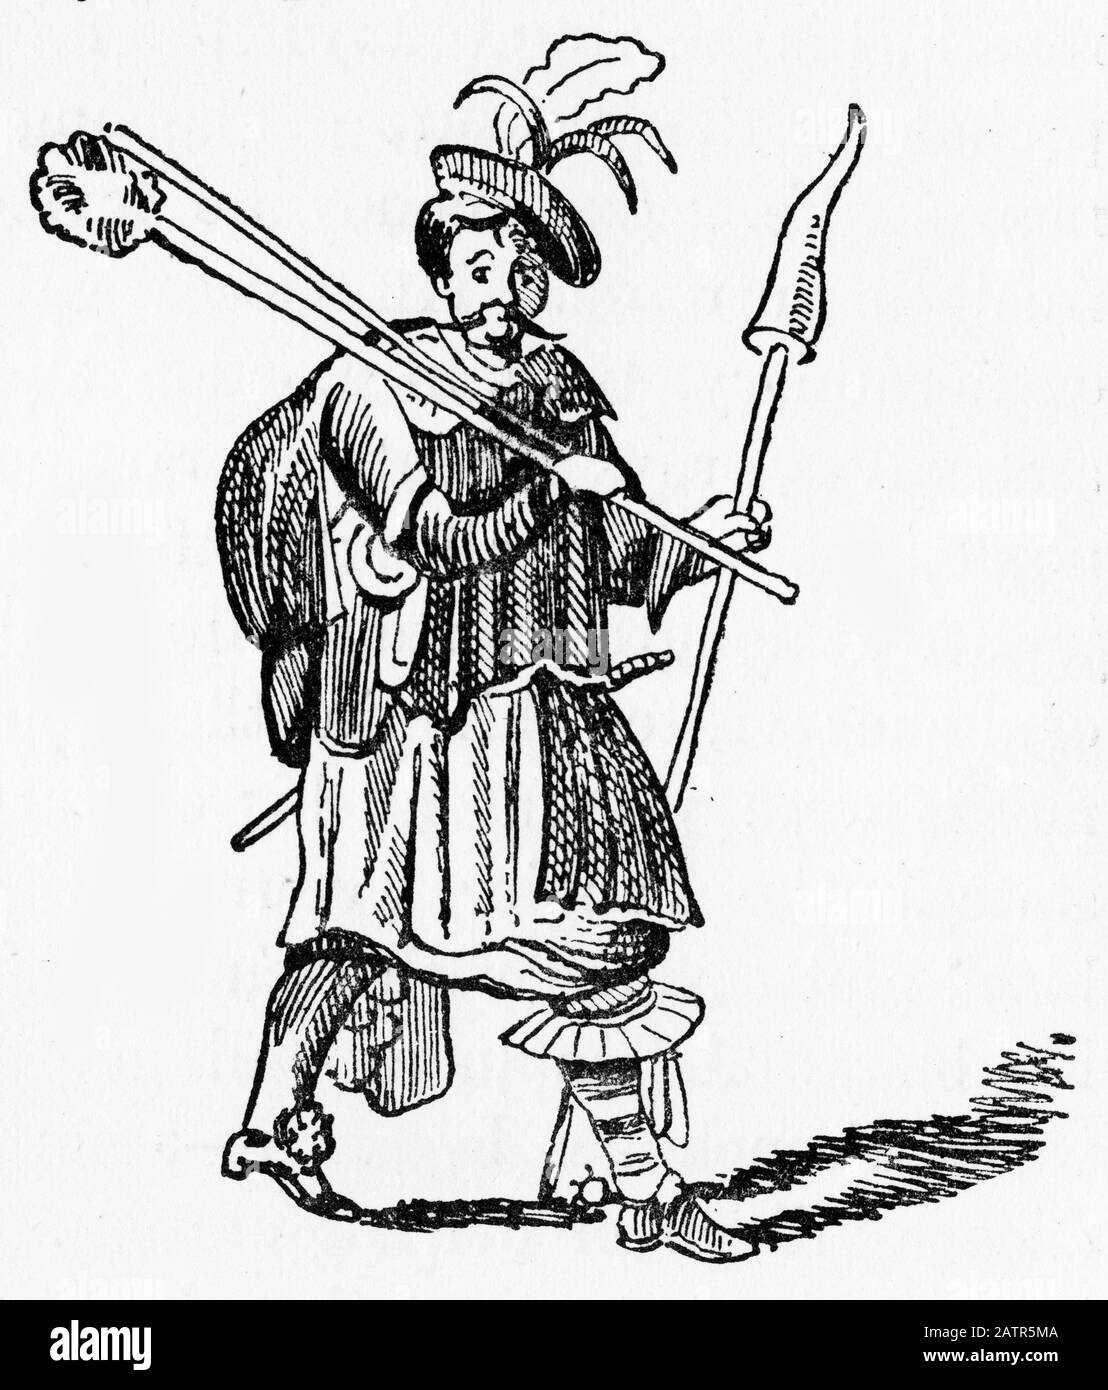 Engraving of John Cottington, called 'Mul-Sack,' chimney sweep, pickpocket and highwayman, hanged at Newgate prison, London, England in 1652. From The Chronicles of Newgate, 1884. Stock Photo